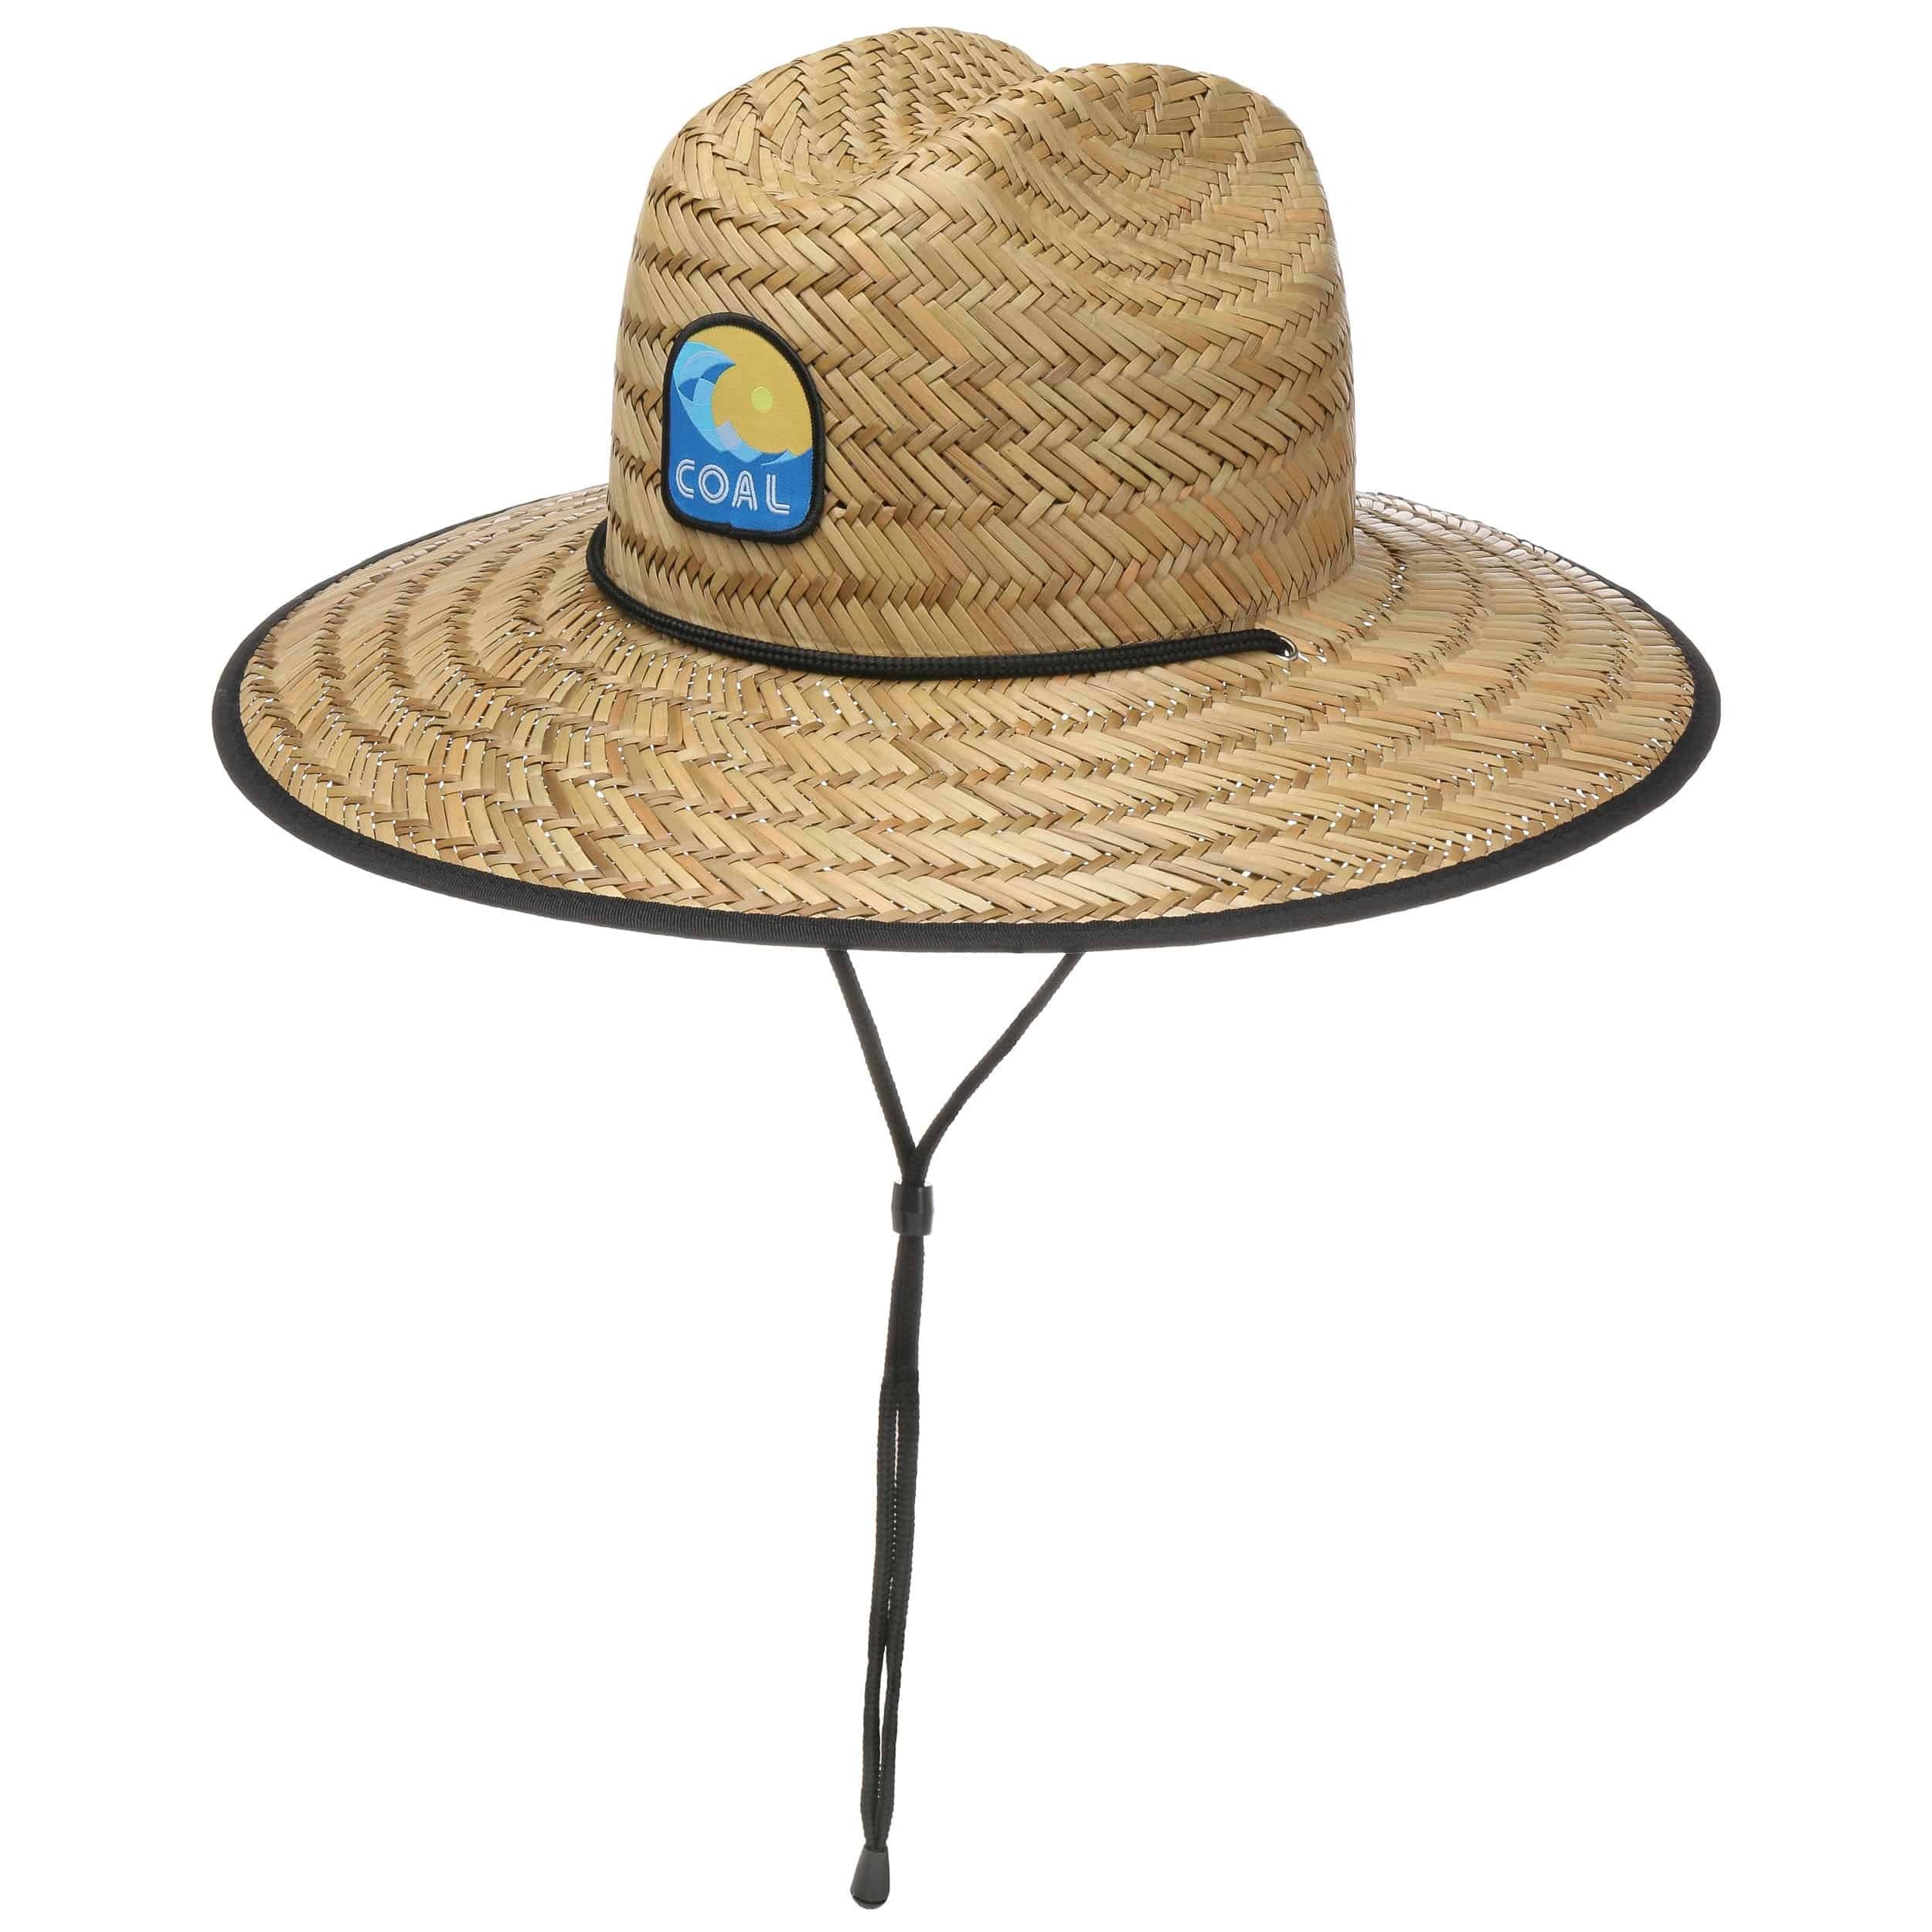 The Huck Lifeguard Straw Hat by Coal - 34,95